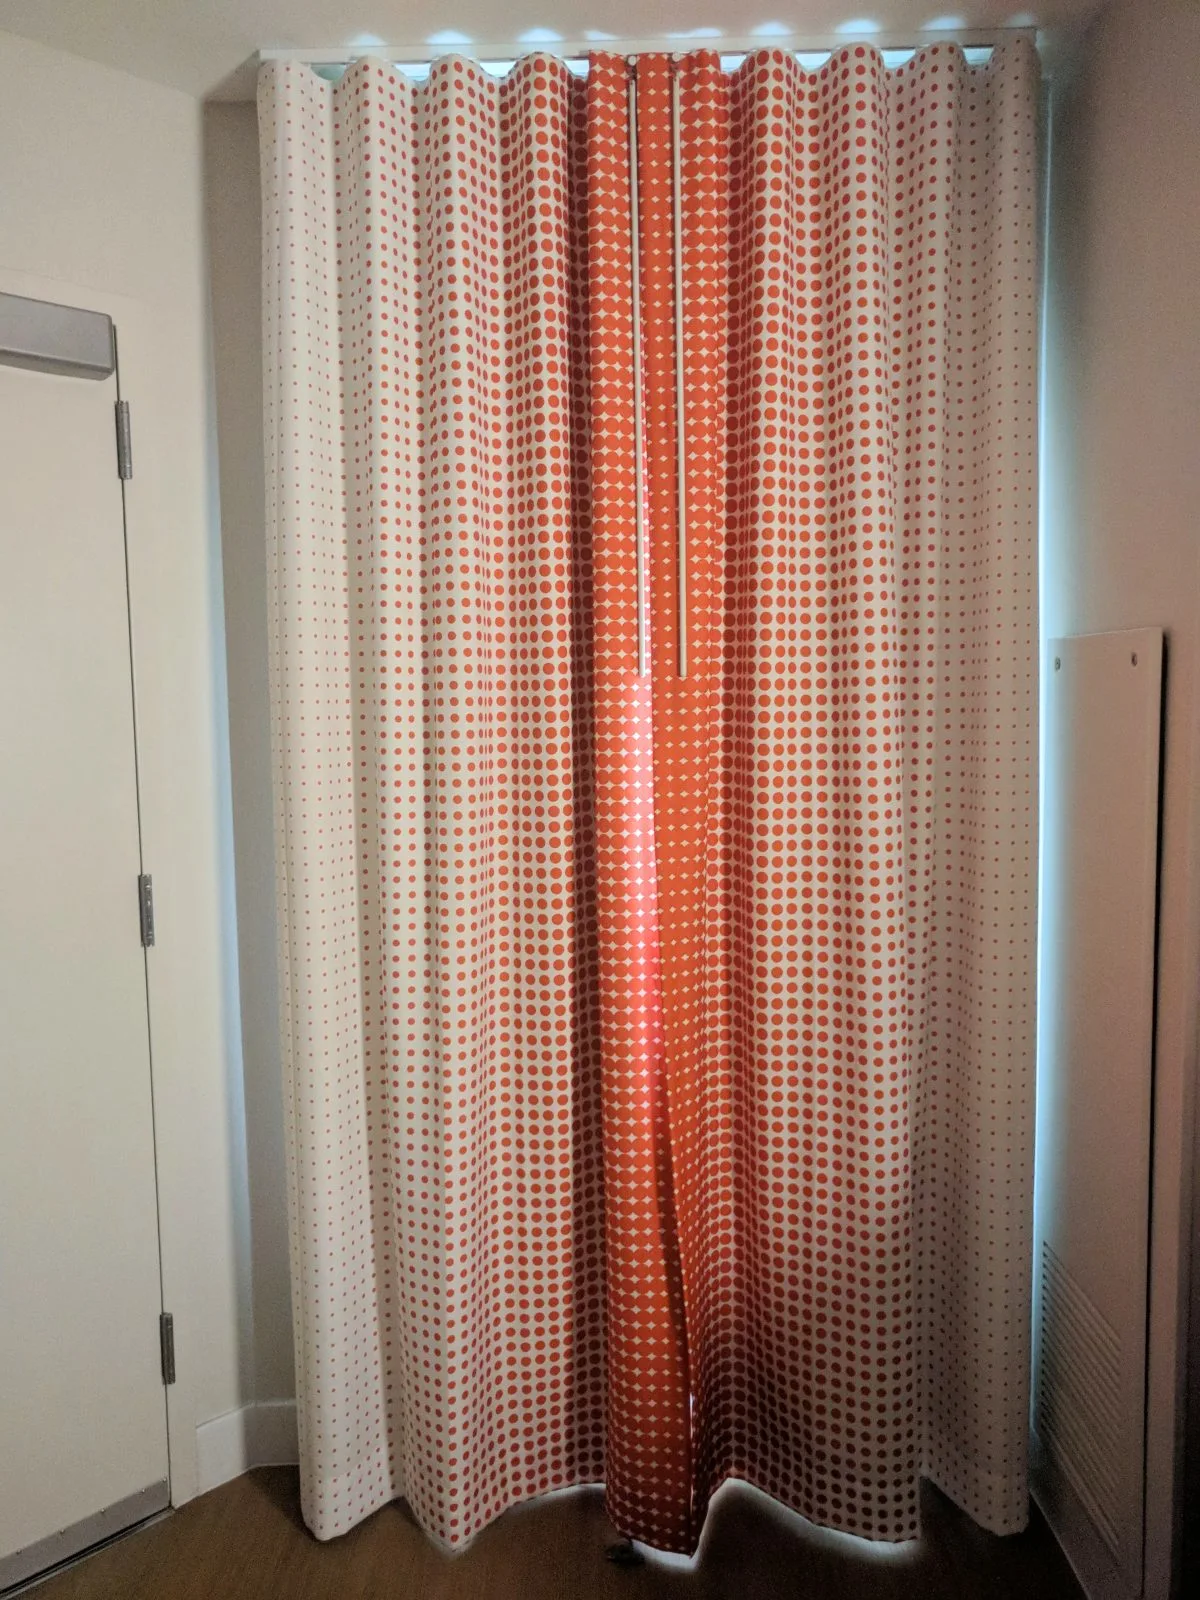 white and orange curtains in the room